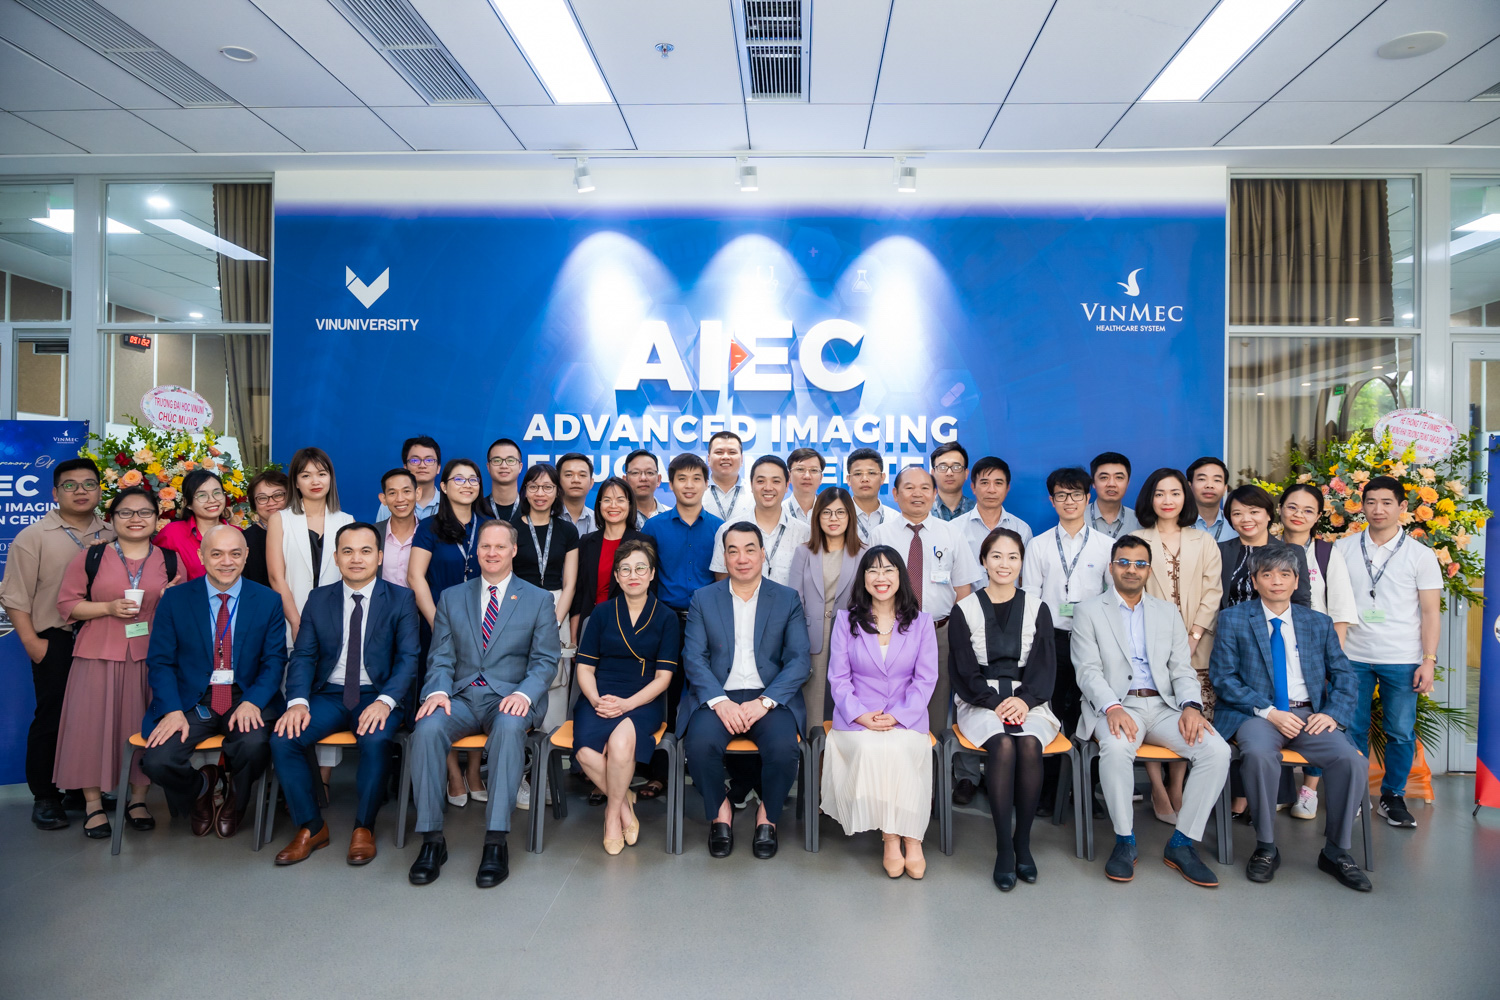 Grand Opening of the First International Standard Advanced Imaging Education Center in Vietnam